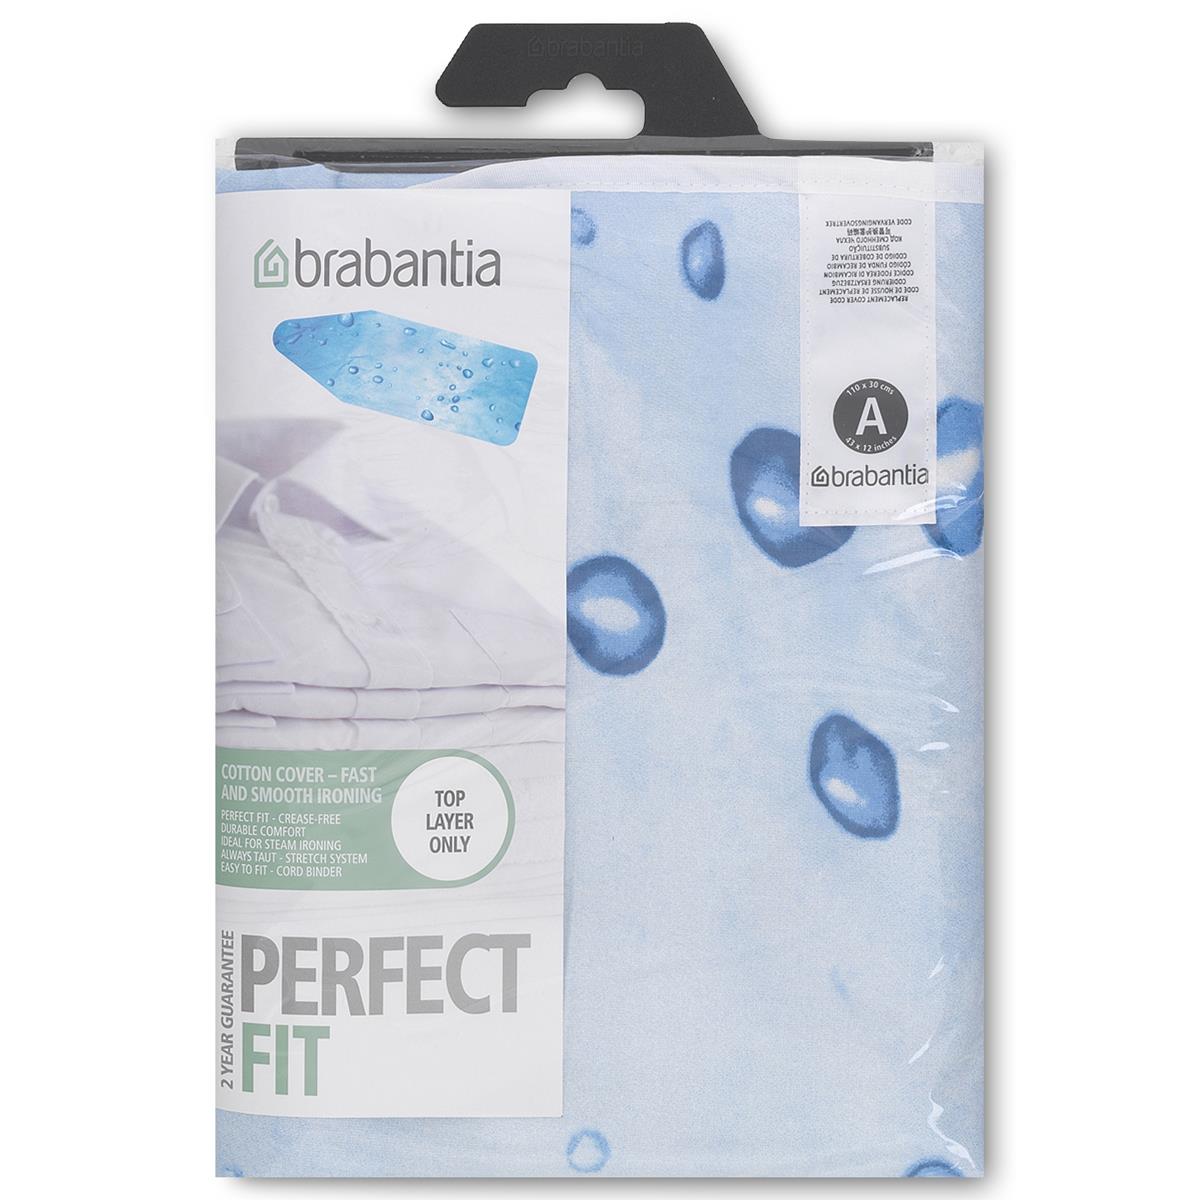 Are Brabantia ironing board covers standard size?